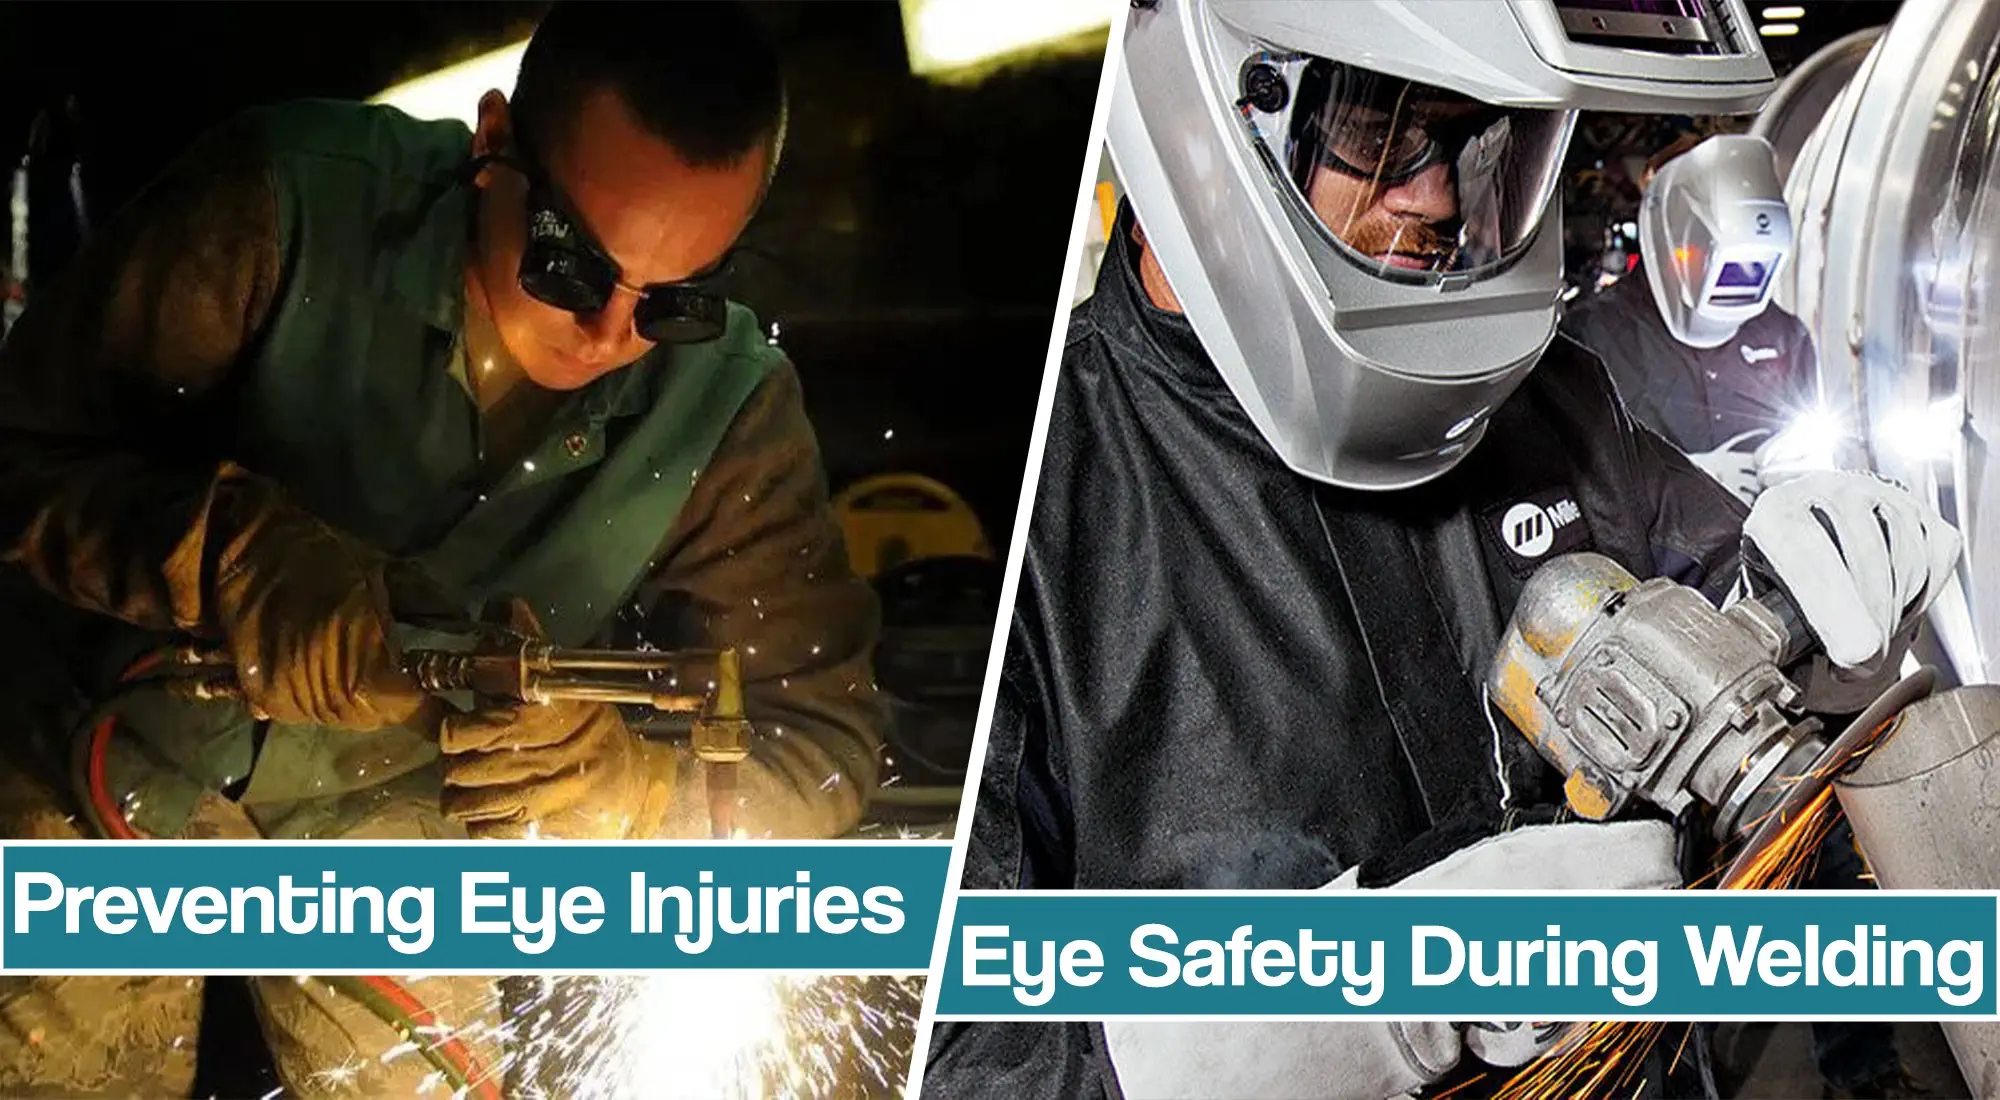 Preventing Eye Injuries When Welding and Improving Welding Safety Practices